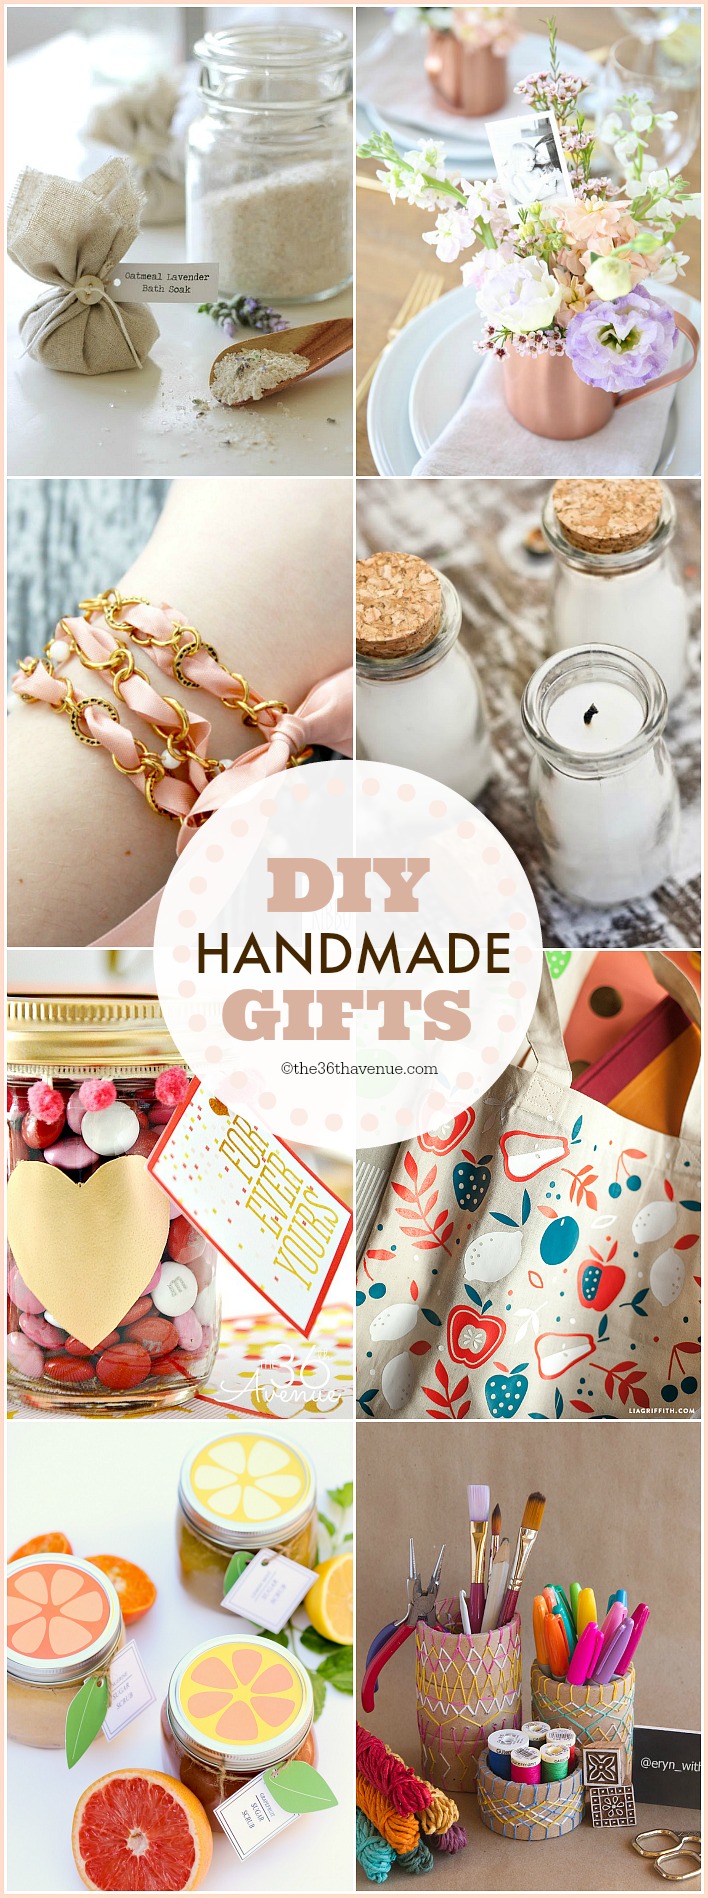 10 DIY Gifts for Your Best Friend ⋆ College Magazine